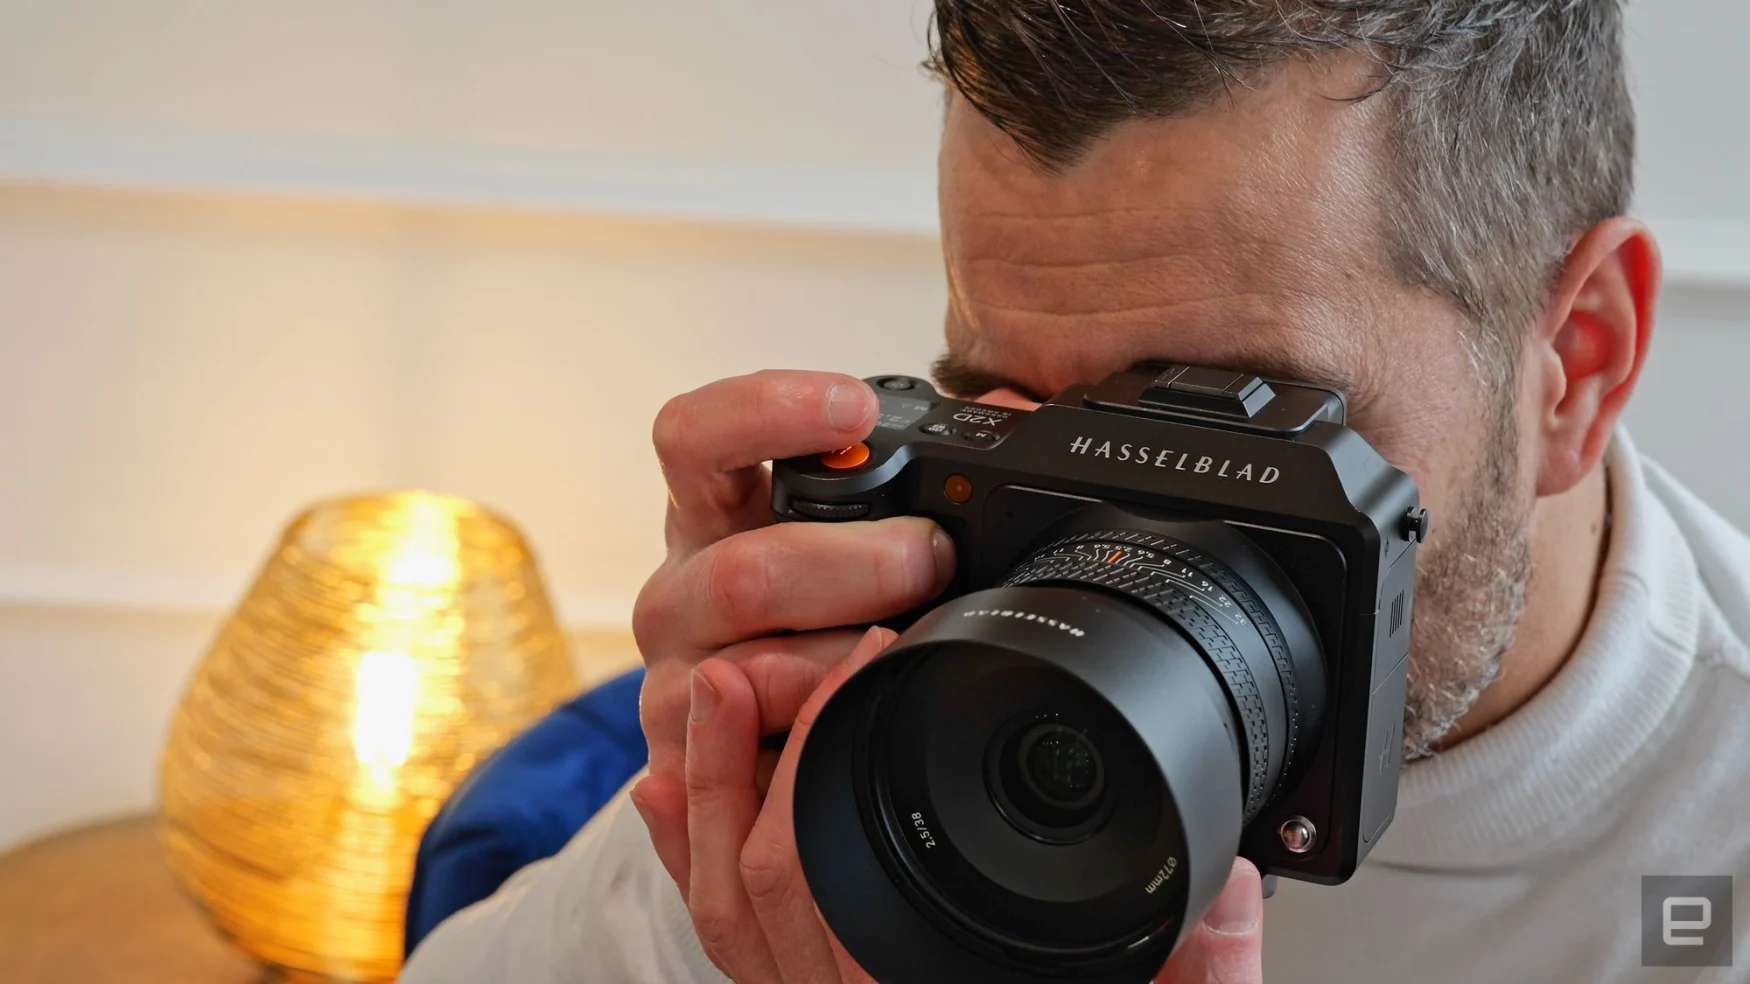 Hasselblad X2D 100C: incredible resolution, beautiful flaws